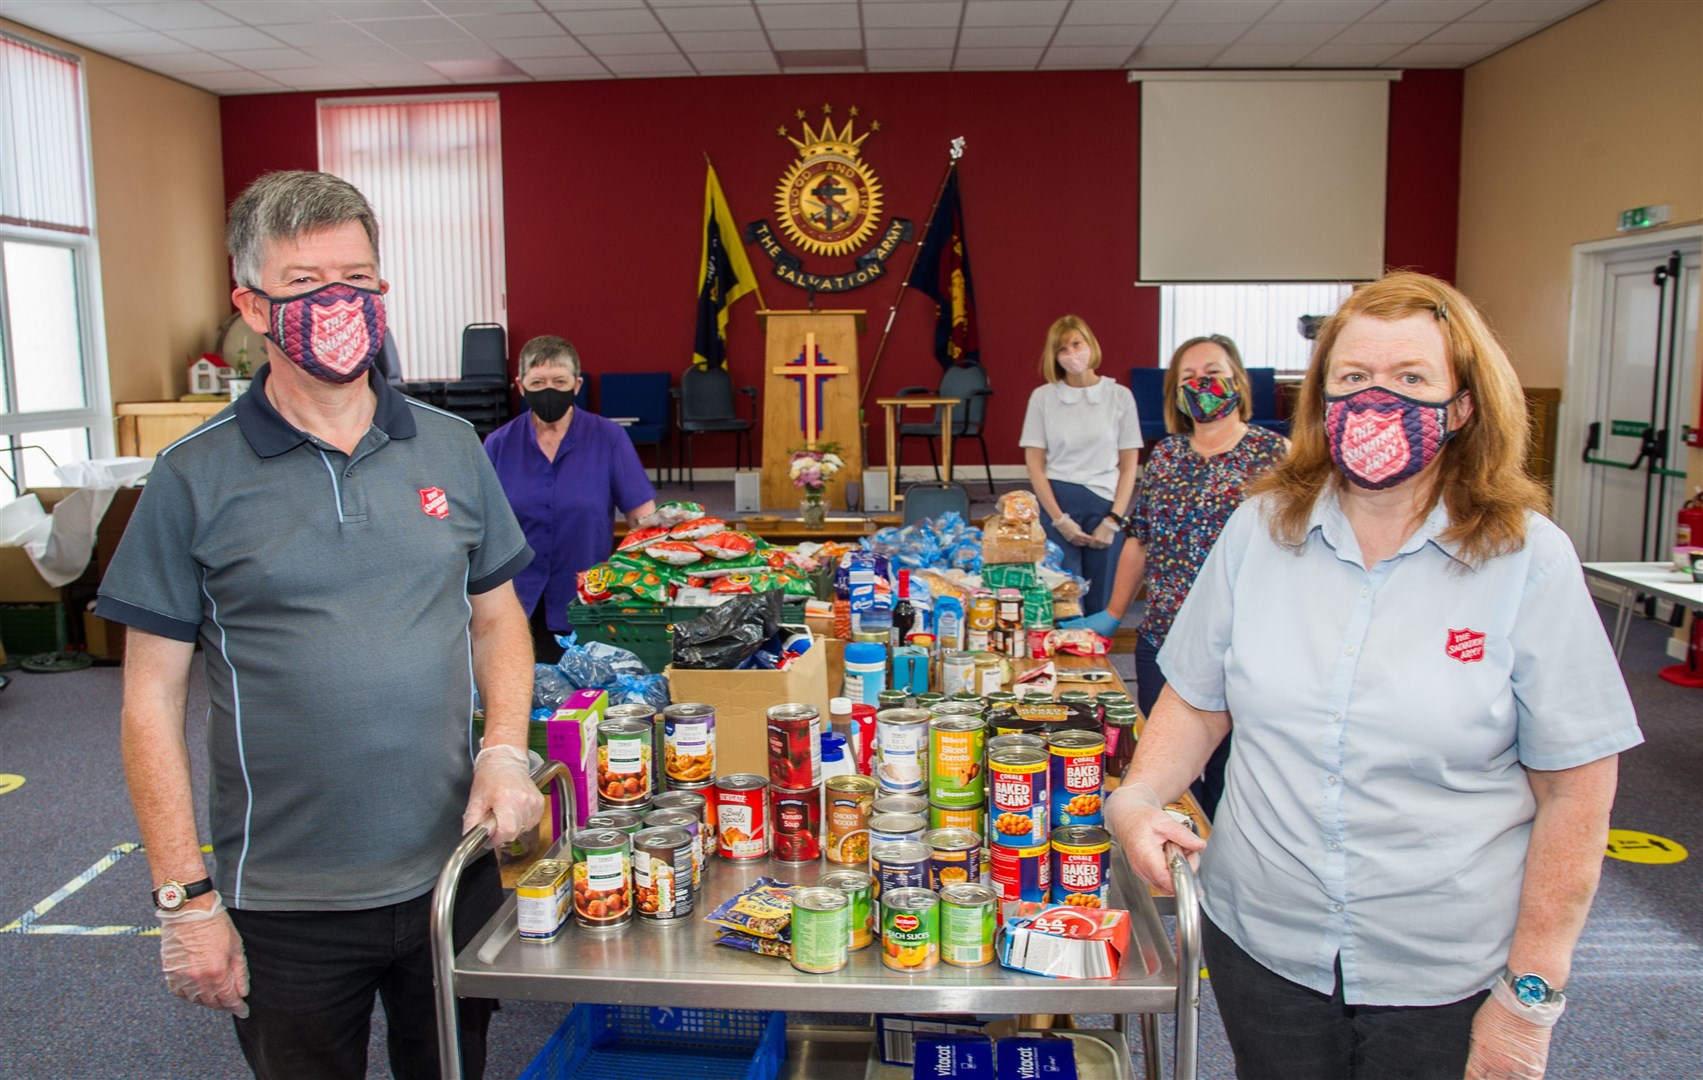 There is still plenty to do for the Buckie food bank team. Pictured are (from left) Major Bruce Smith, Elizabeth Dinwoodie, Louise Campbell, Elizabeth Douglas and Major Isobel Smith. Picture: Becky Saunderson